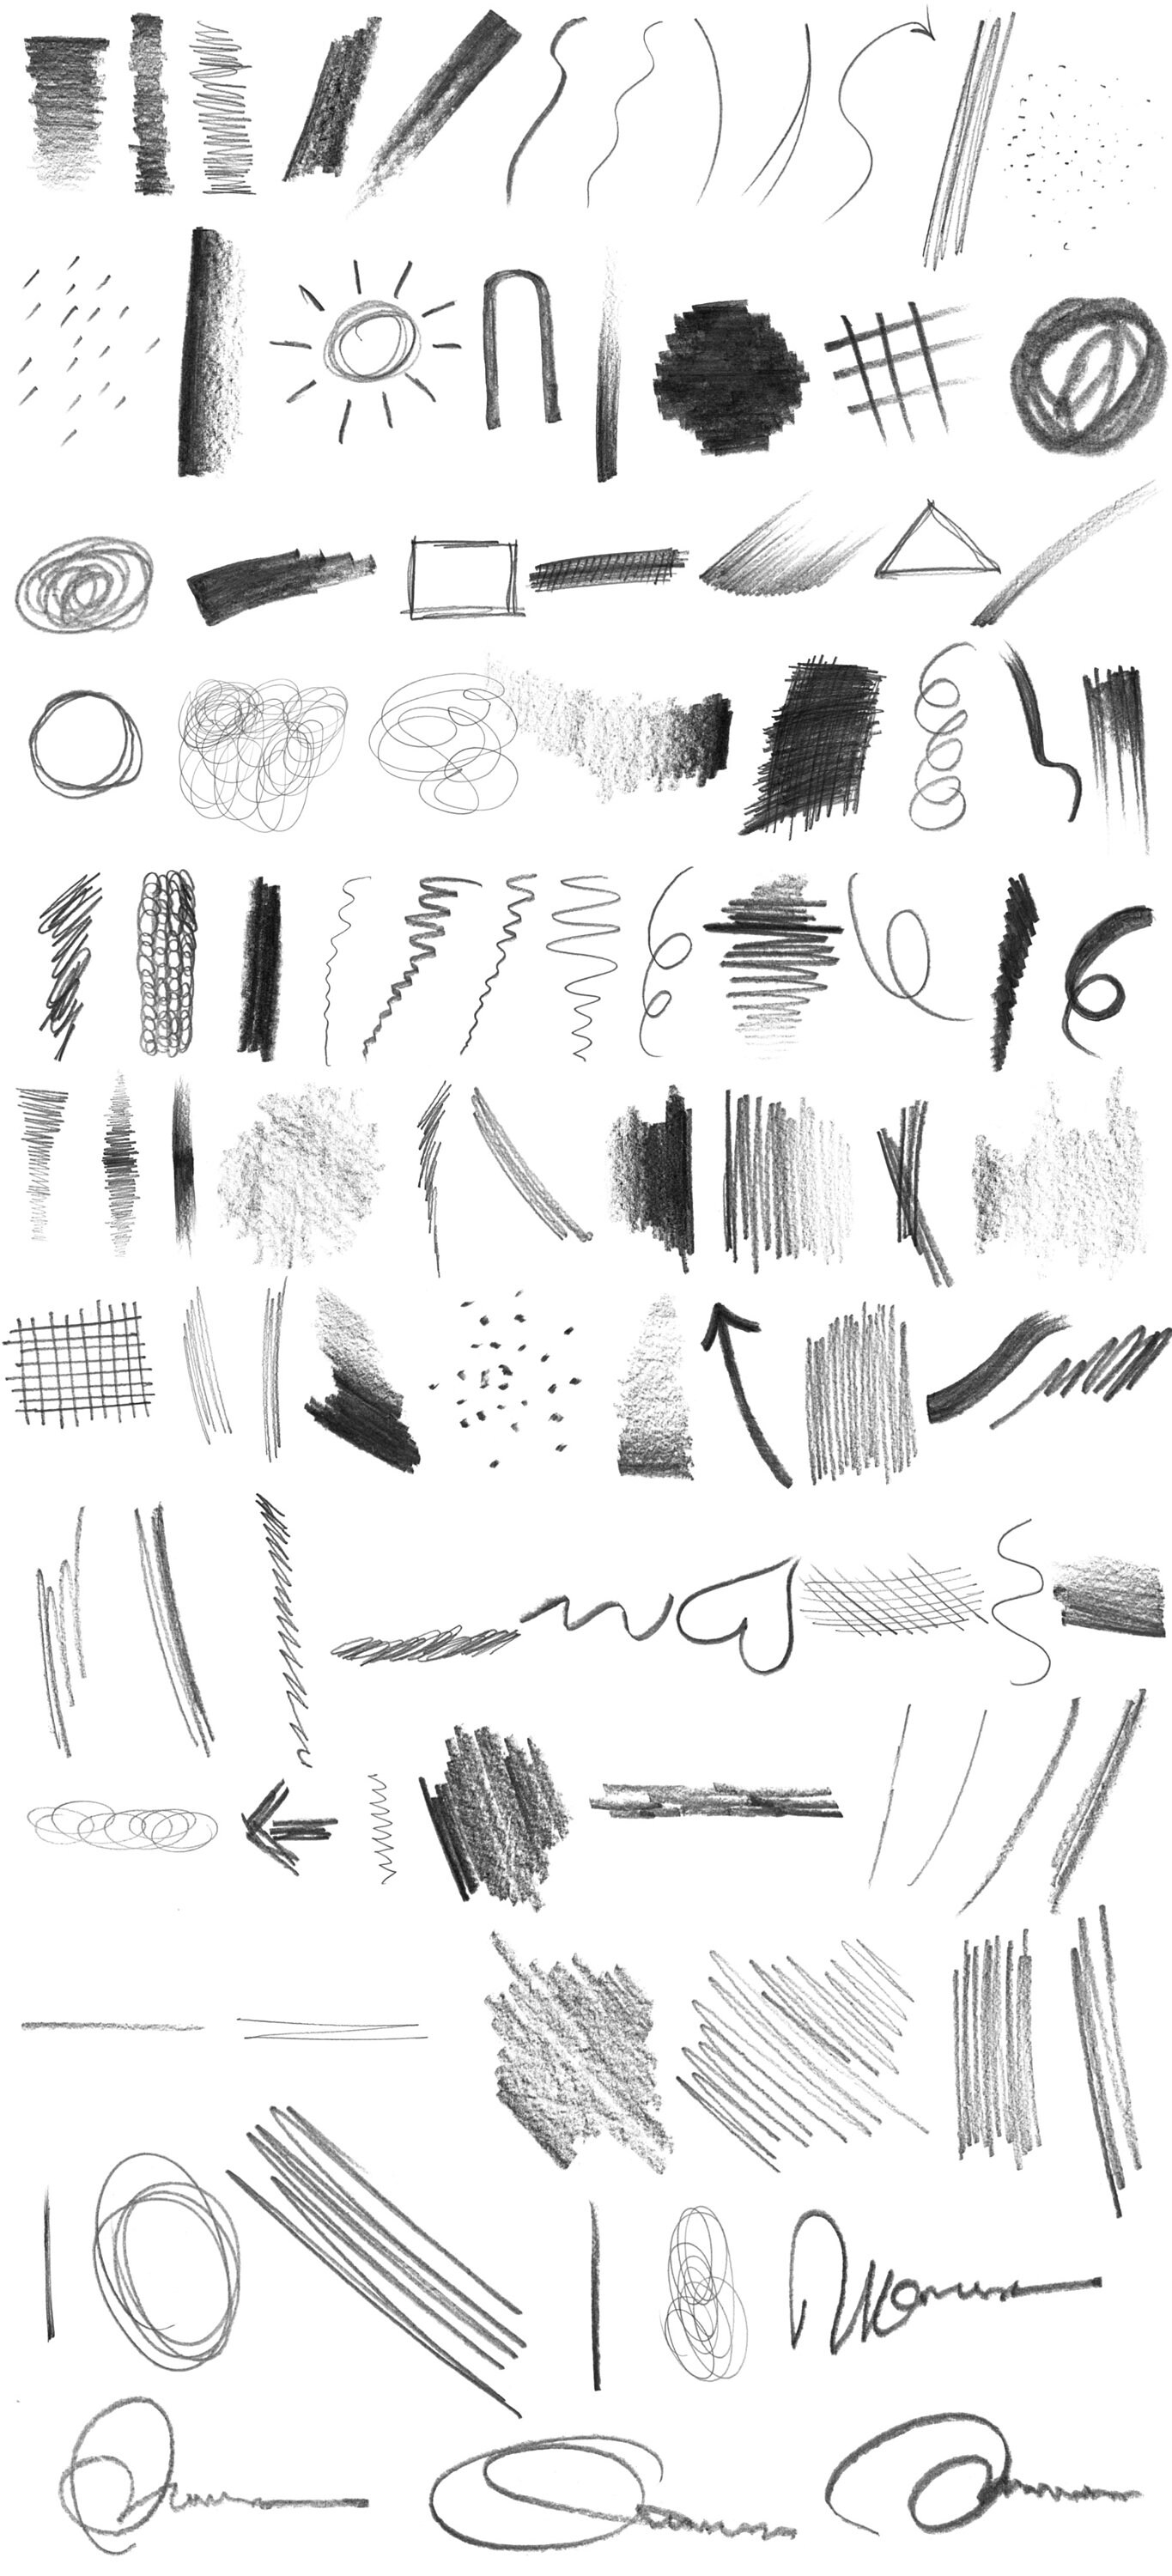 Buy 100 Pencil Sketch Brushes for Photoshop ABR File Sketching Online in  India  Etsy